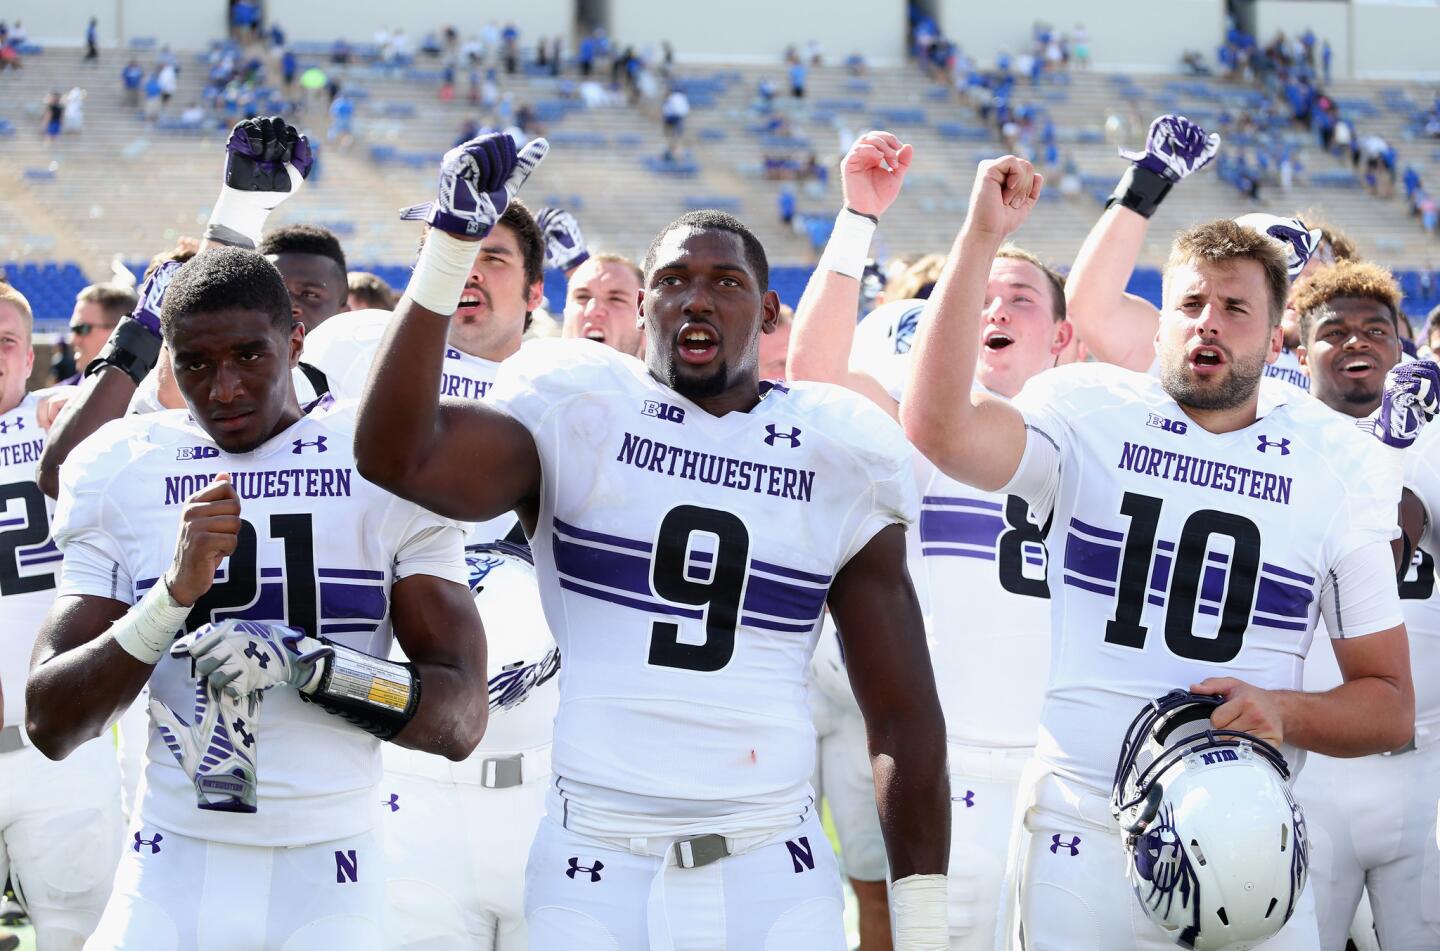 The Northwestern Wildcats celebrate after defeating the Duke Blue Devils 19-10.